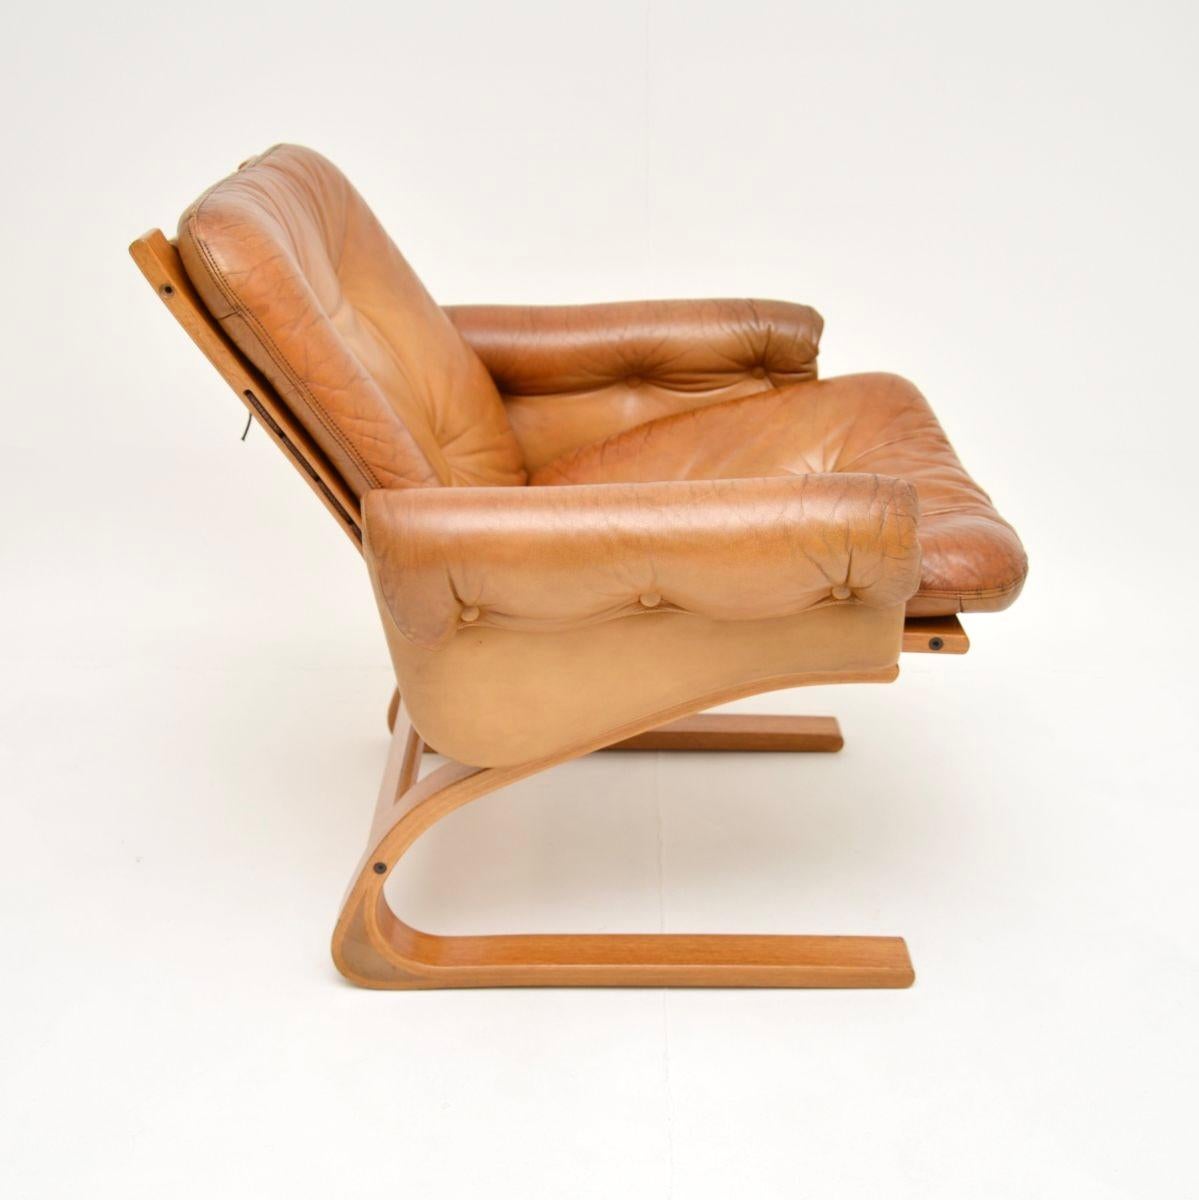 Vintage Leather Kengu Armchair by Elsa and Nordahl Solheim for Rykken In Good Condition For Sale In London, GB